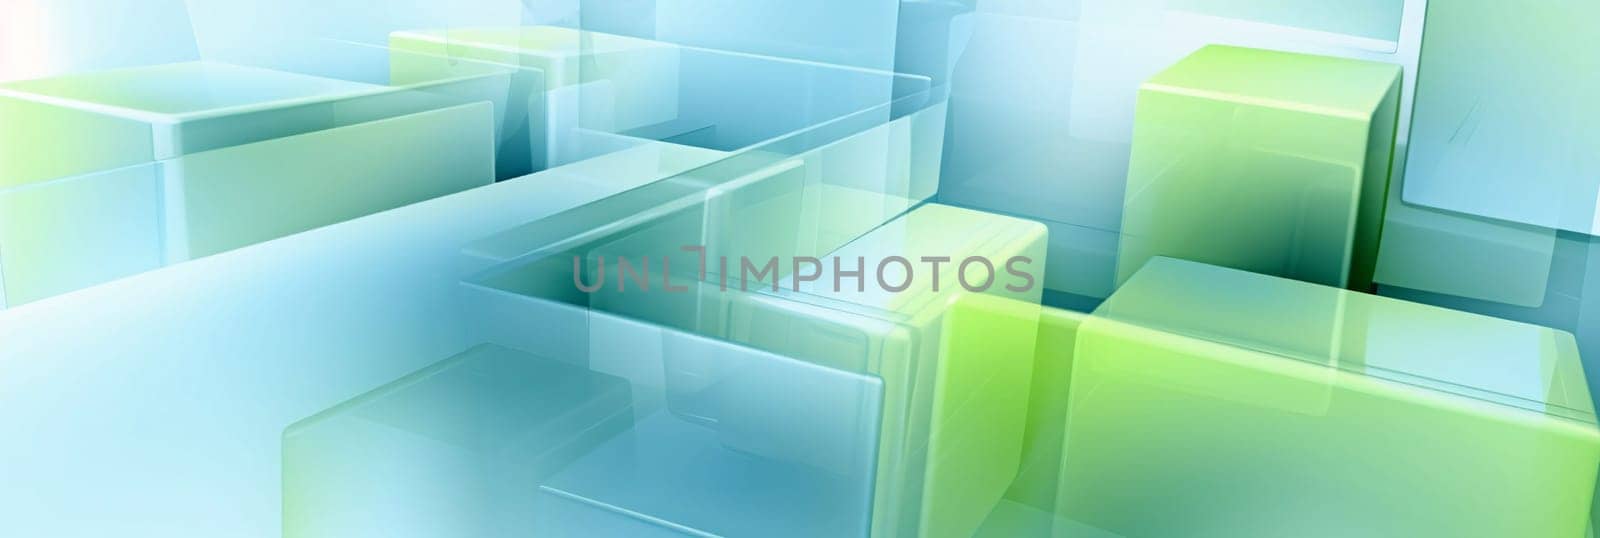 Abstract background design: Abstract background. Glossy glass cubes, 3d blocks with light effects composition